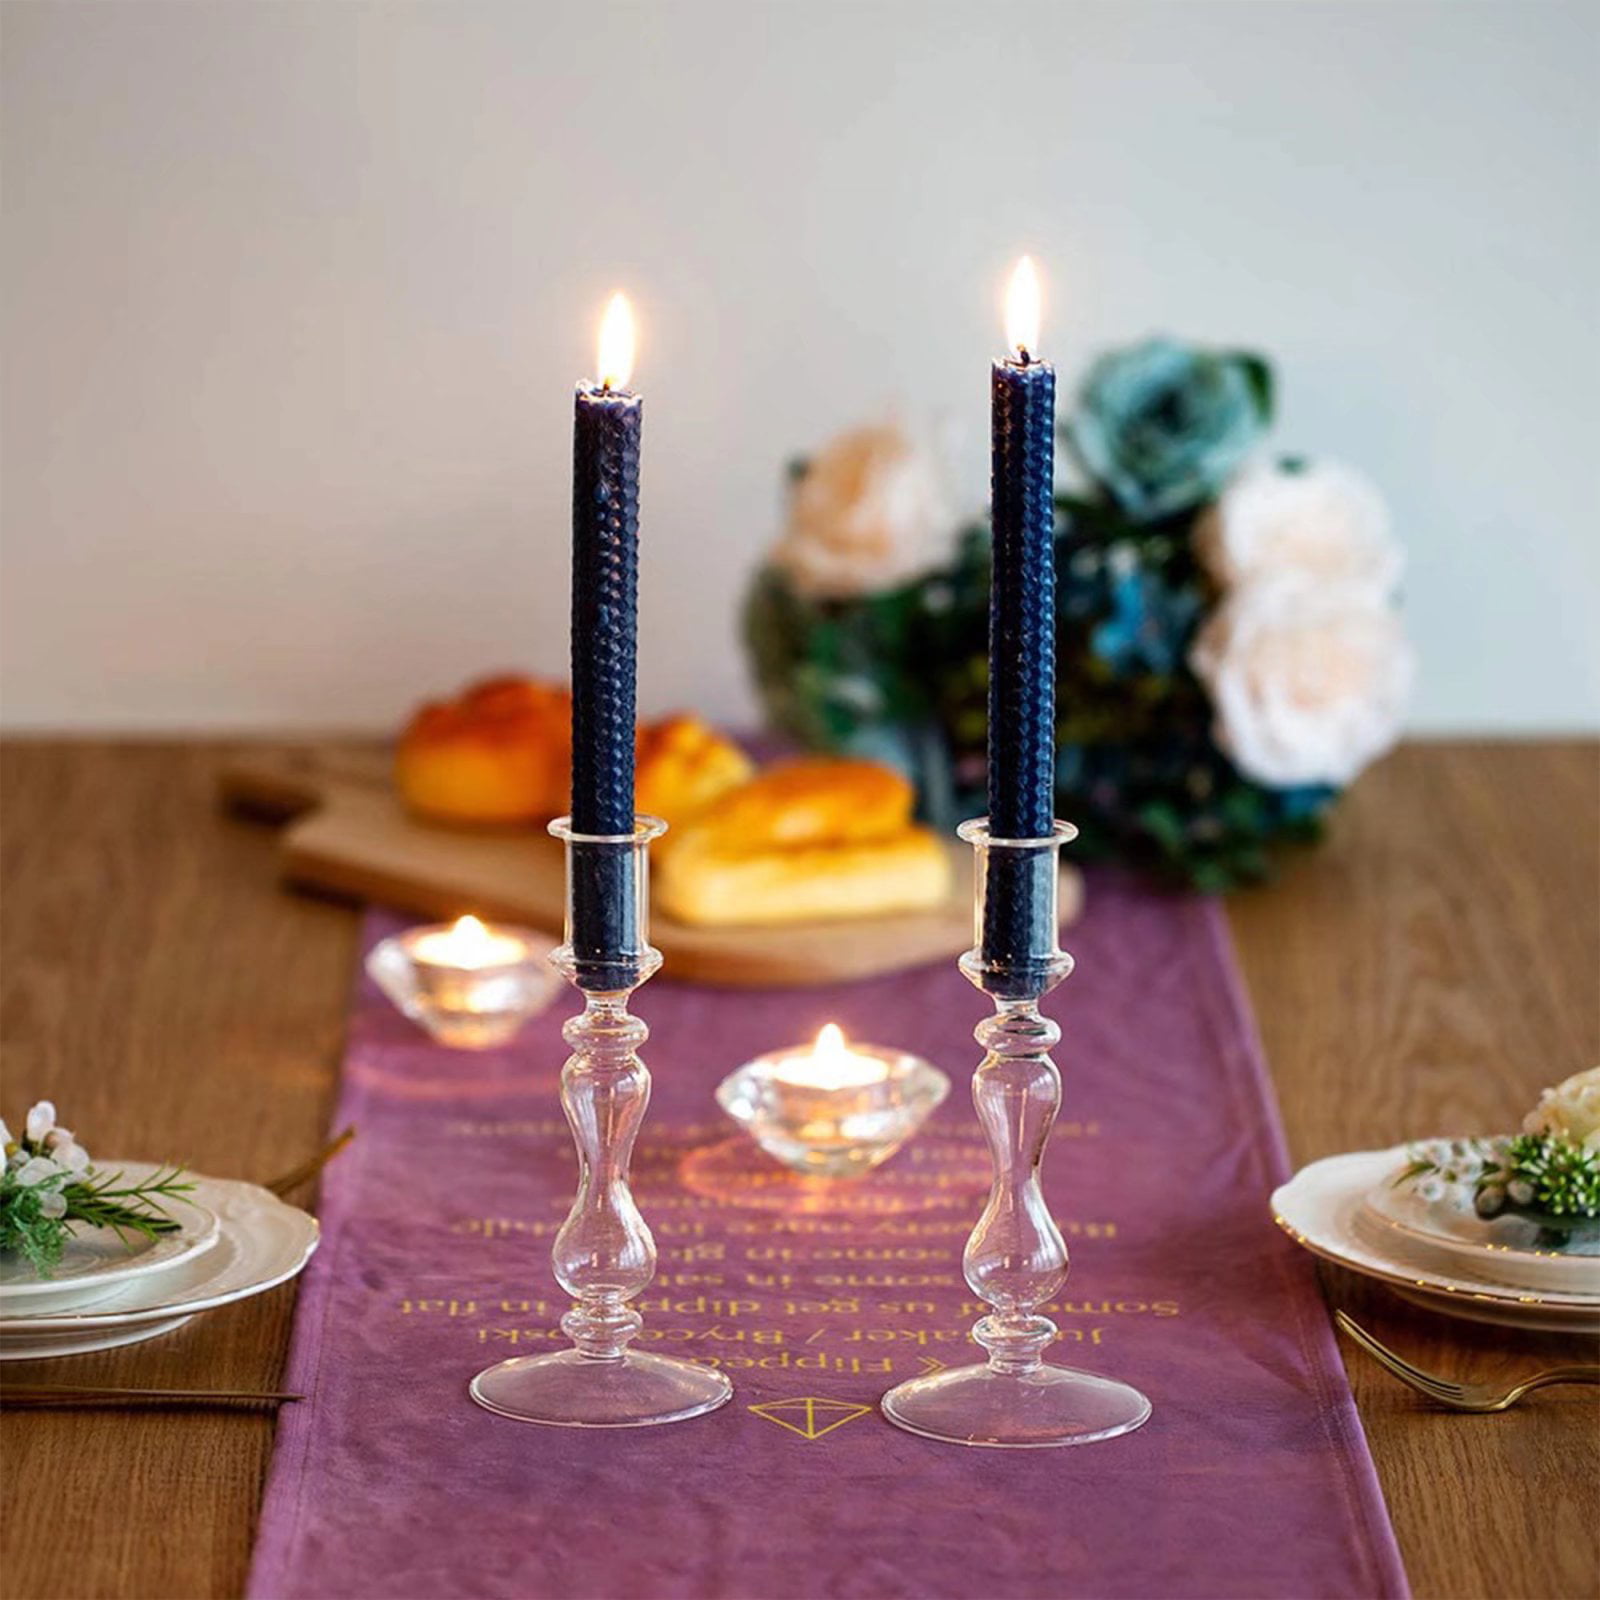 Glass Taper Candle Holders 2Pcs Wide Base Candlestick Holder Table Decorations Fits 2cm Taper Candles Indoor Outdoor for Wedding Party Dinning